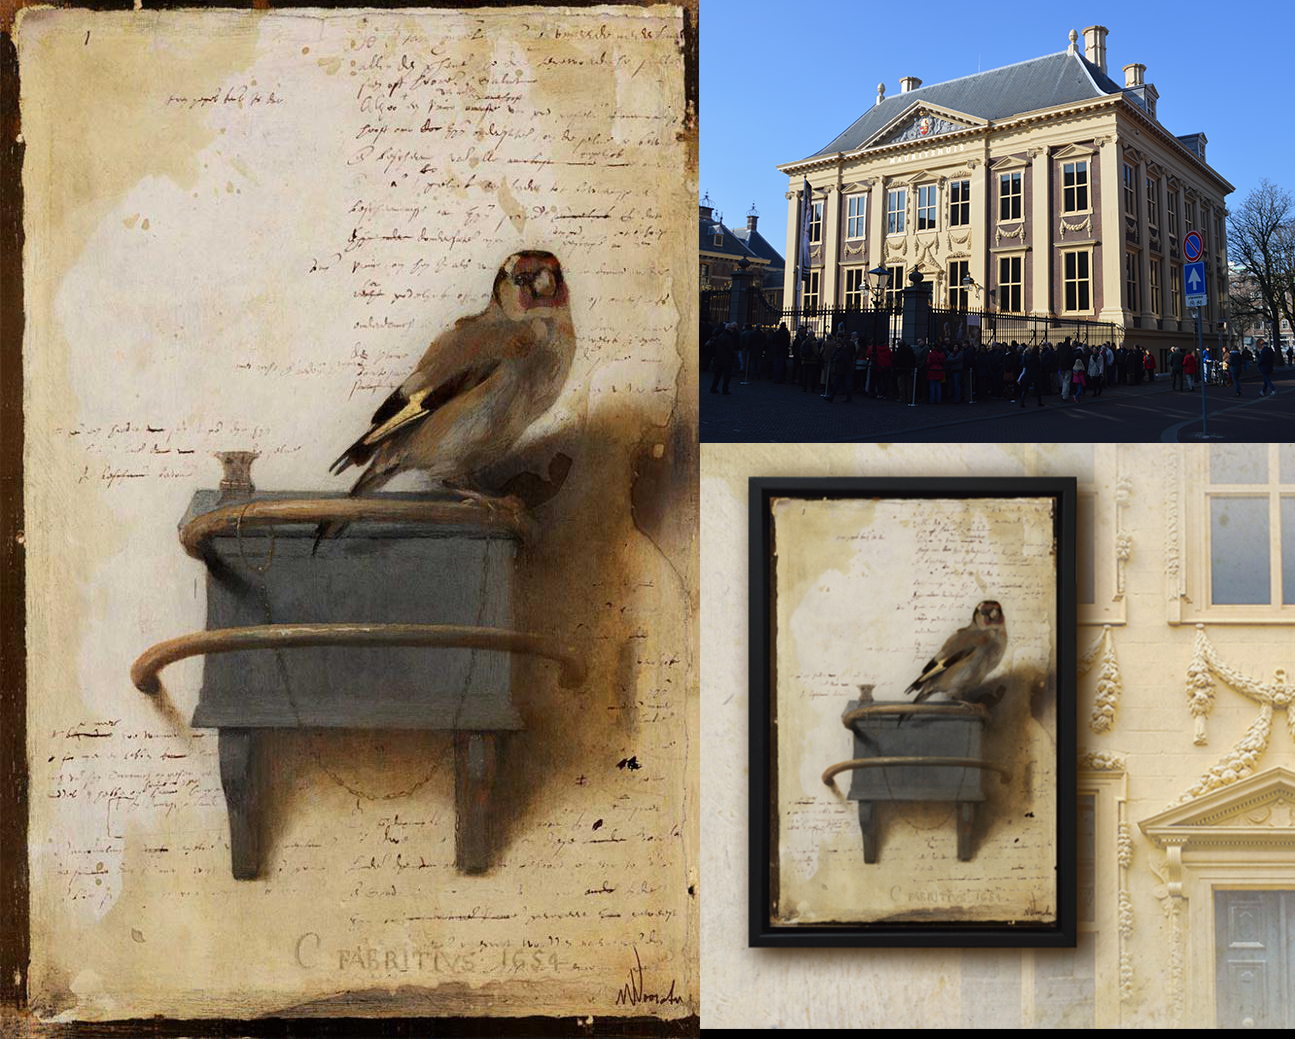 Graphic art in The Mauritshuis